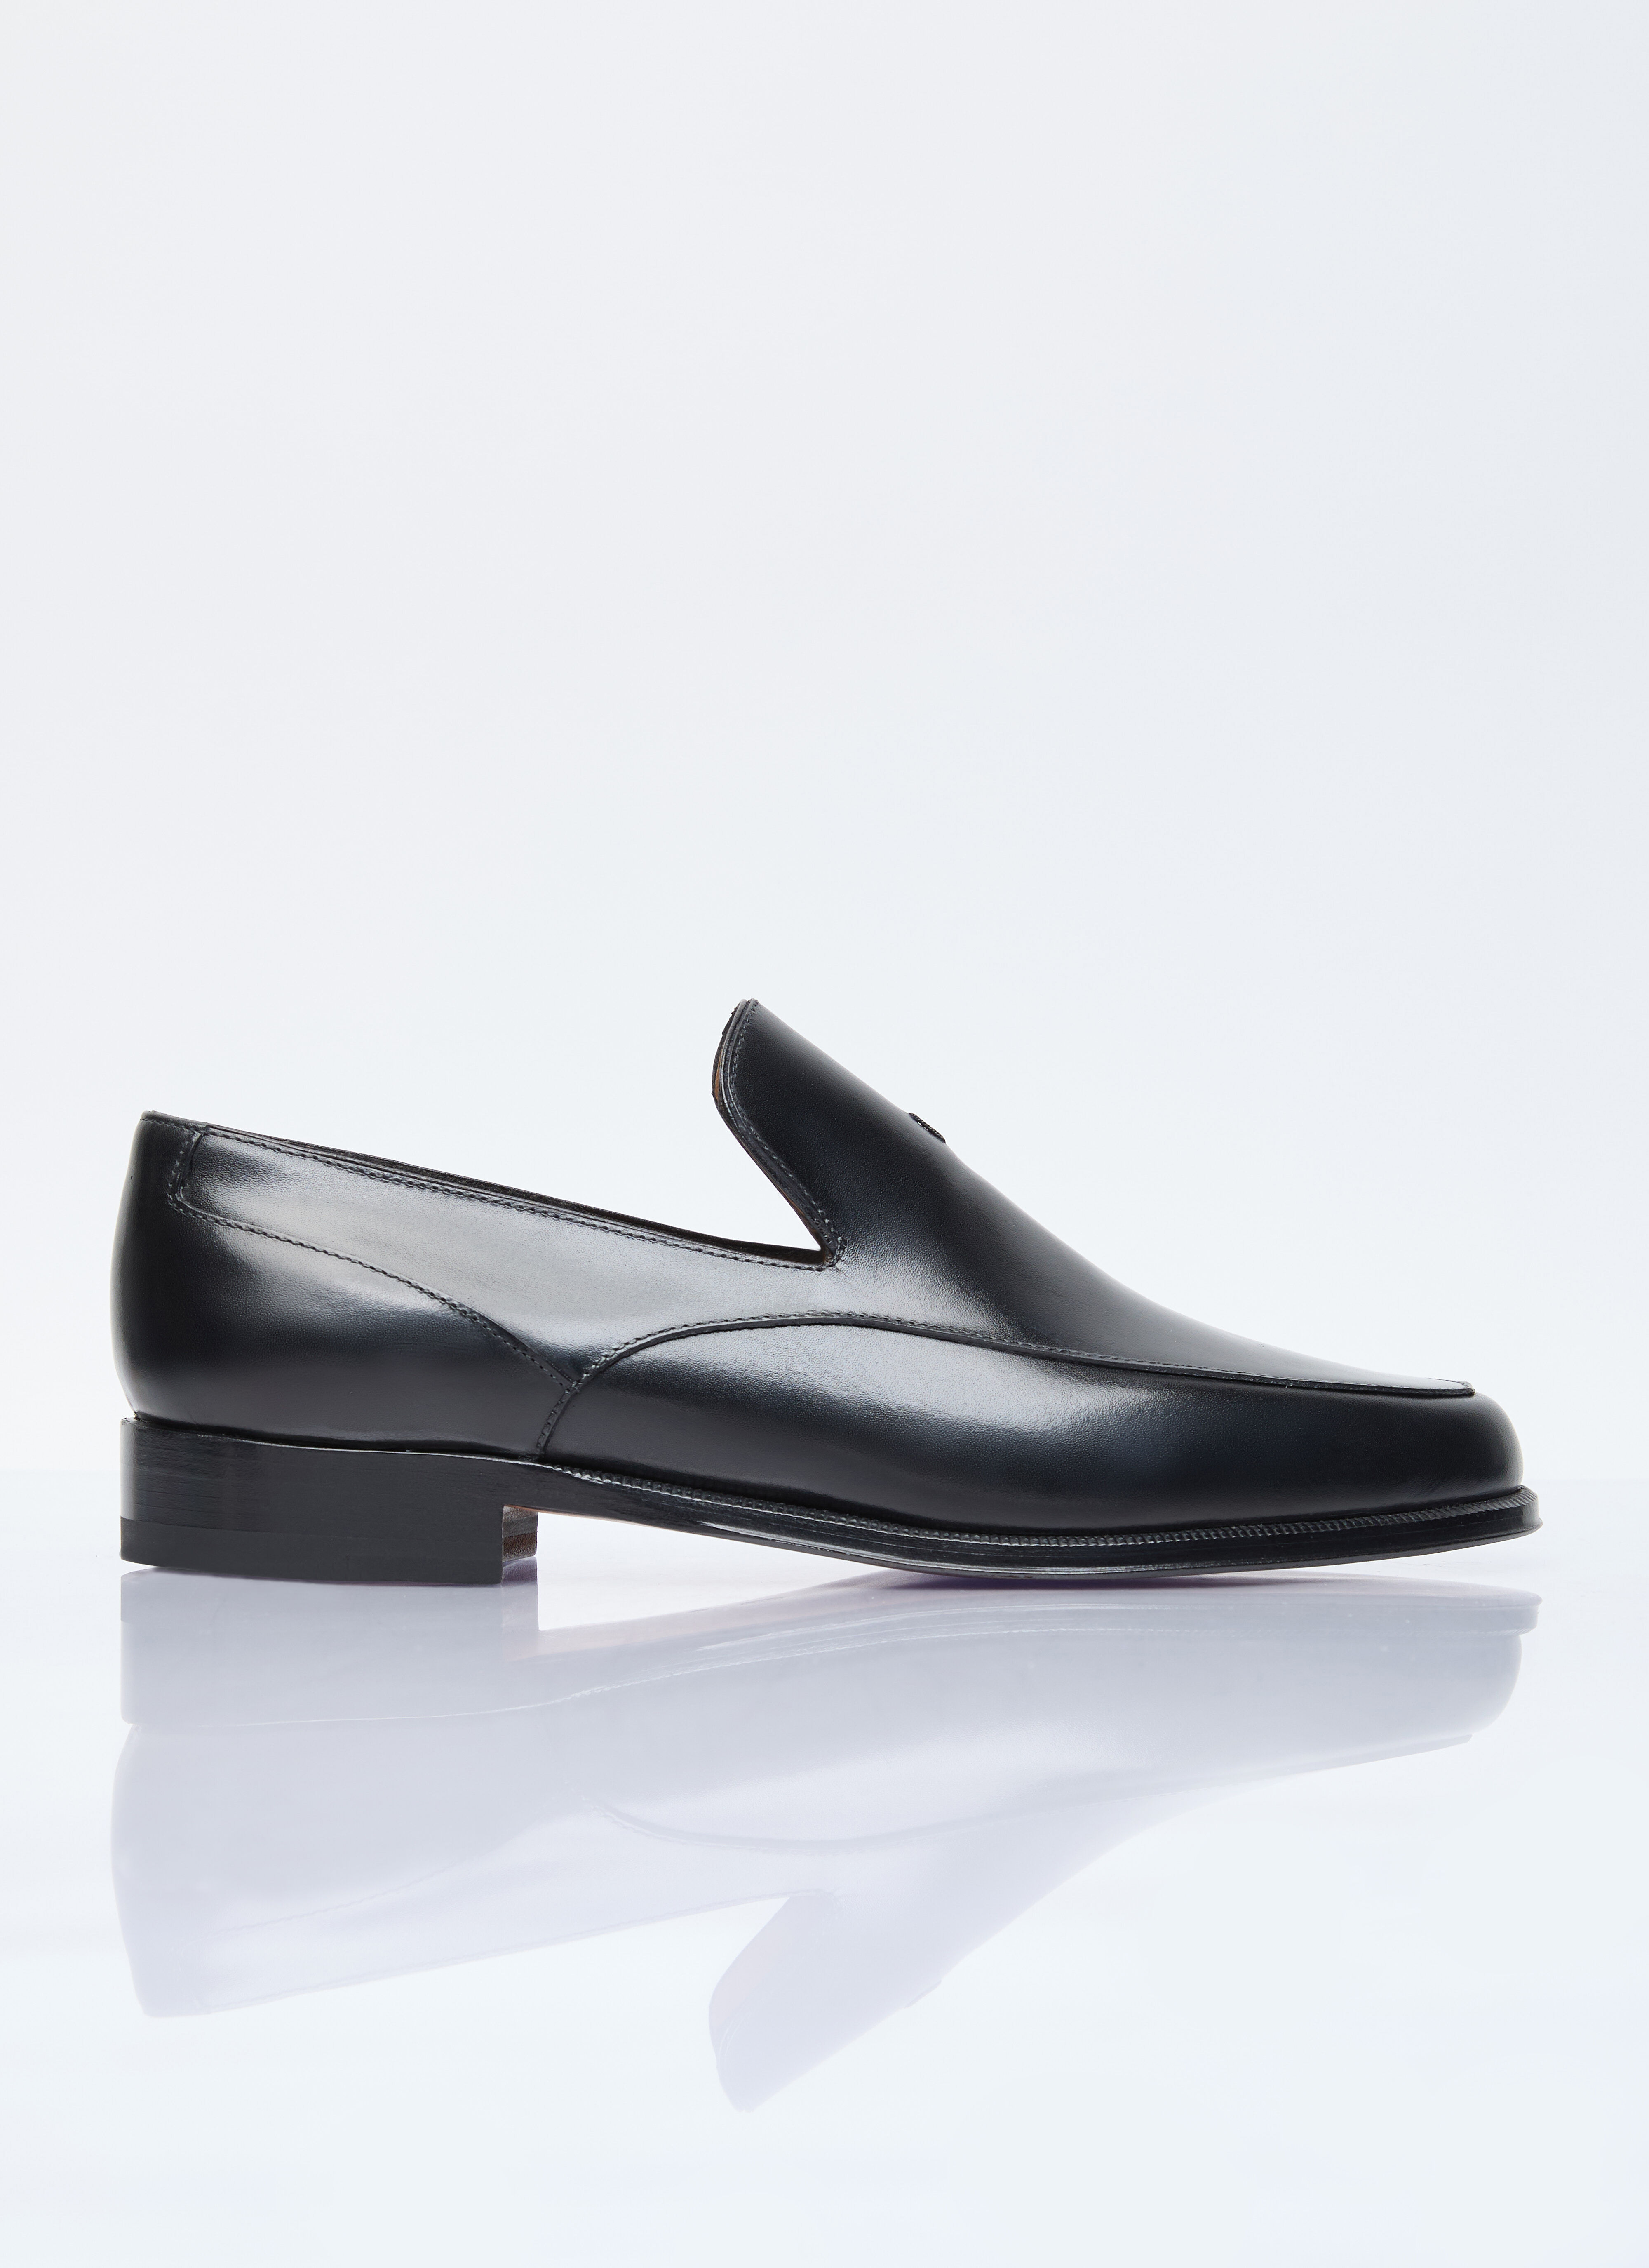 Gucci Enzo Leather Loafers Black guc0255061